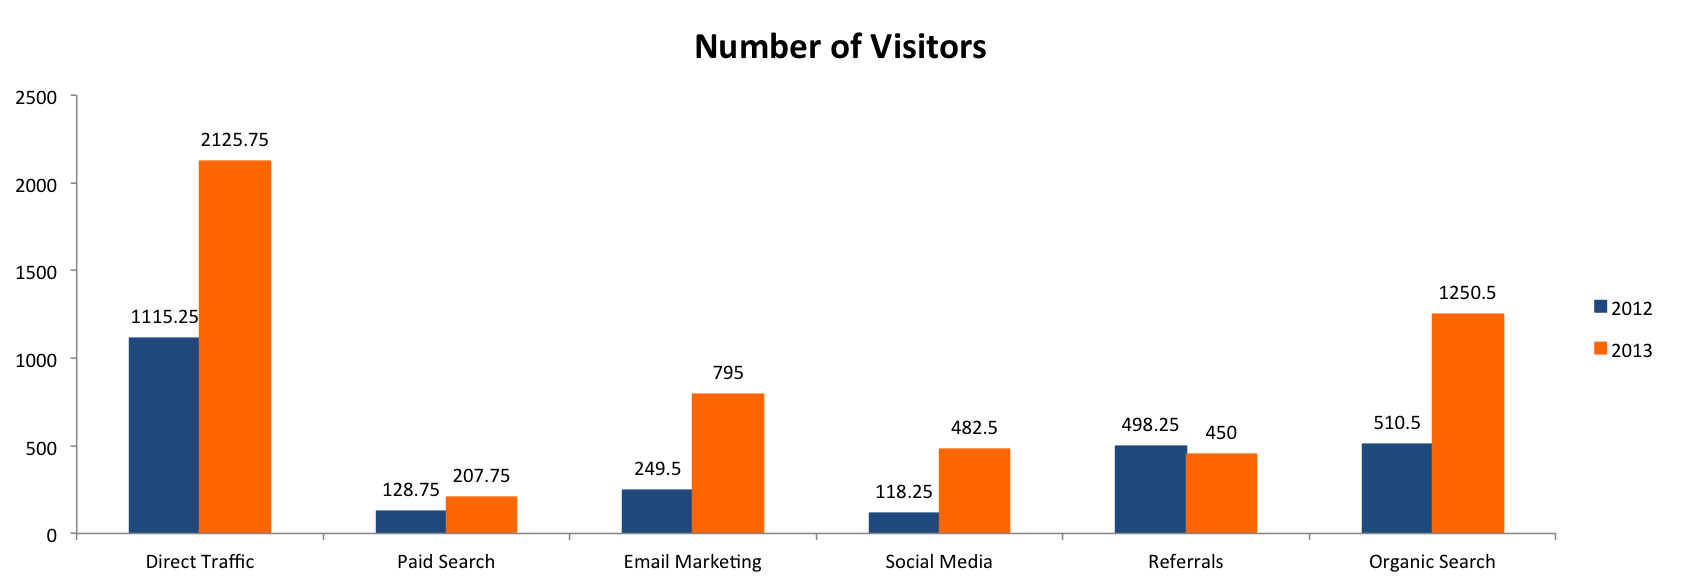 Number_of_Visitors_by_Source